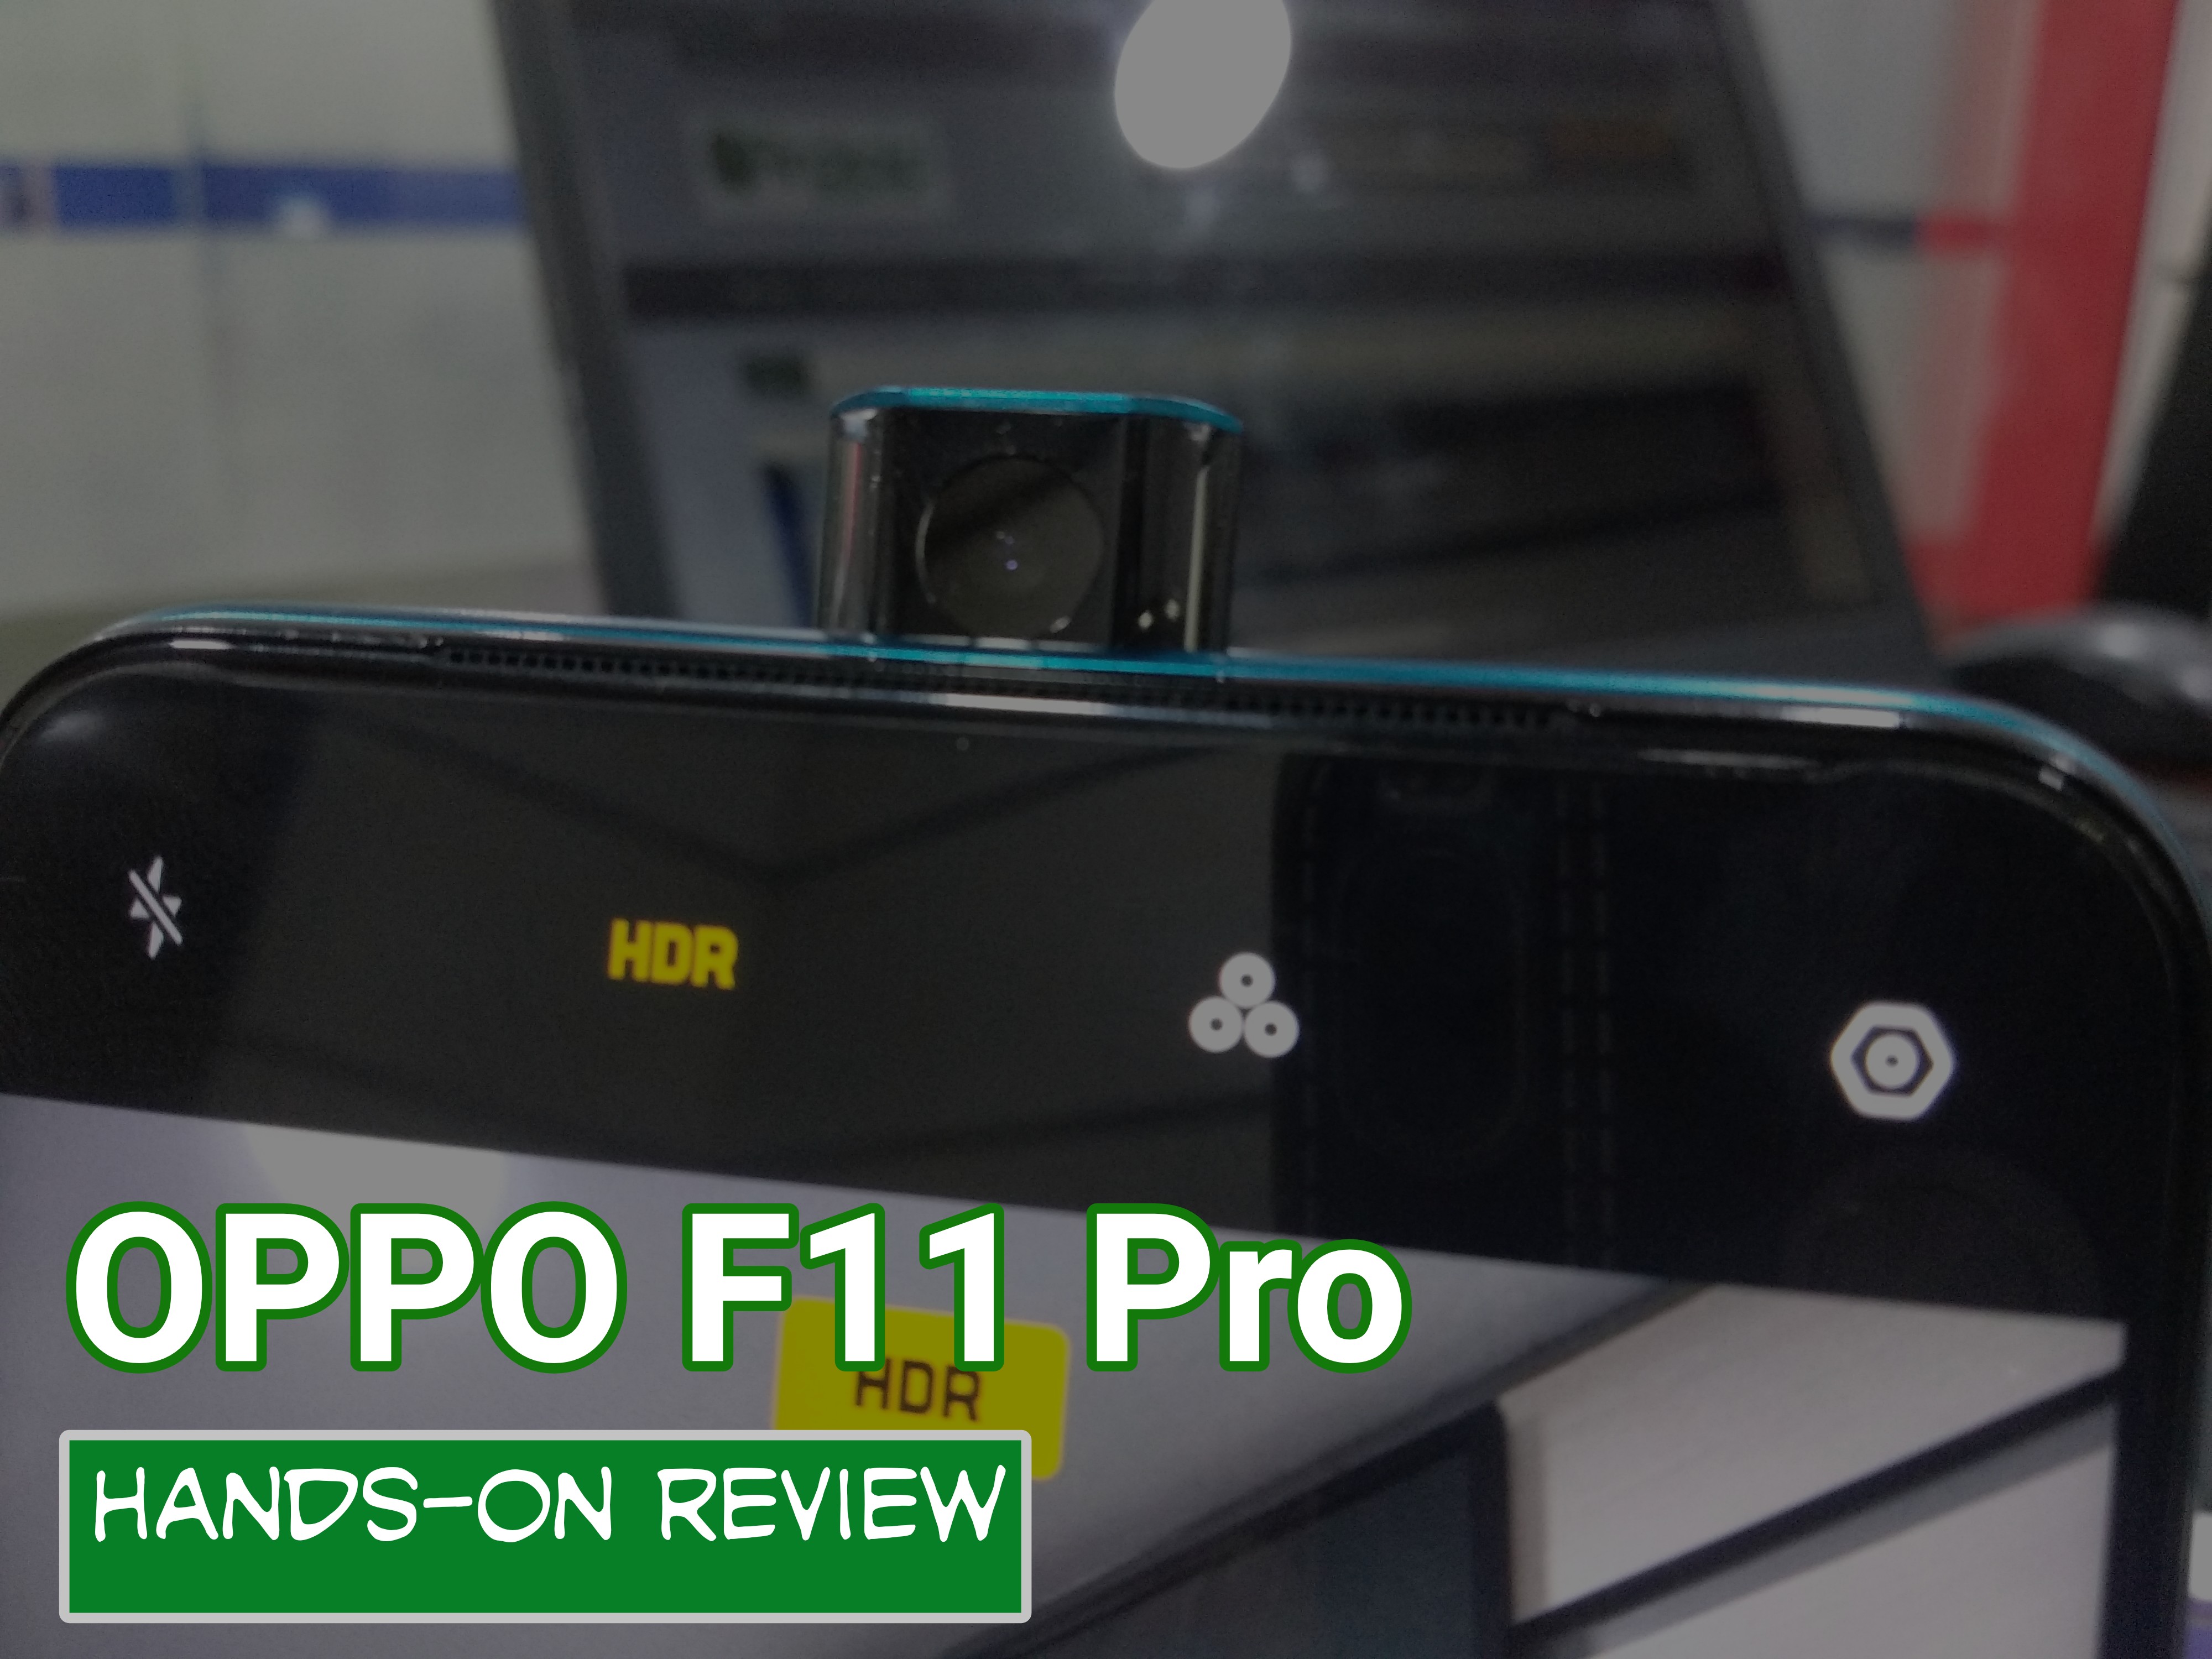 OPPO F11 Pro Hands-on Review